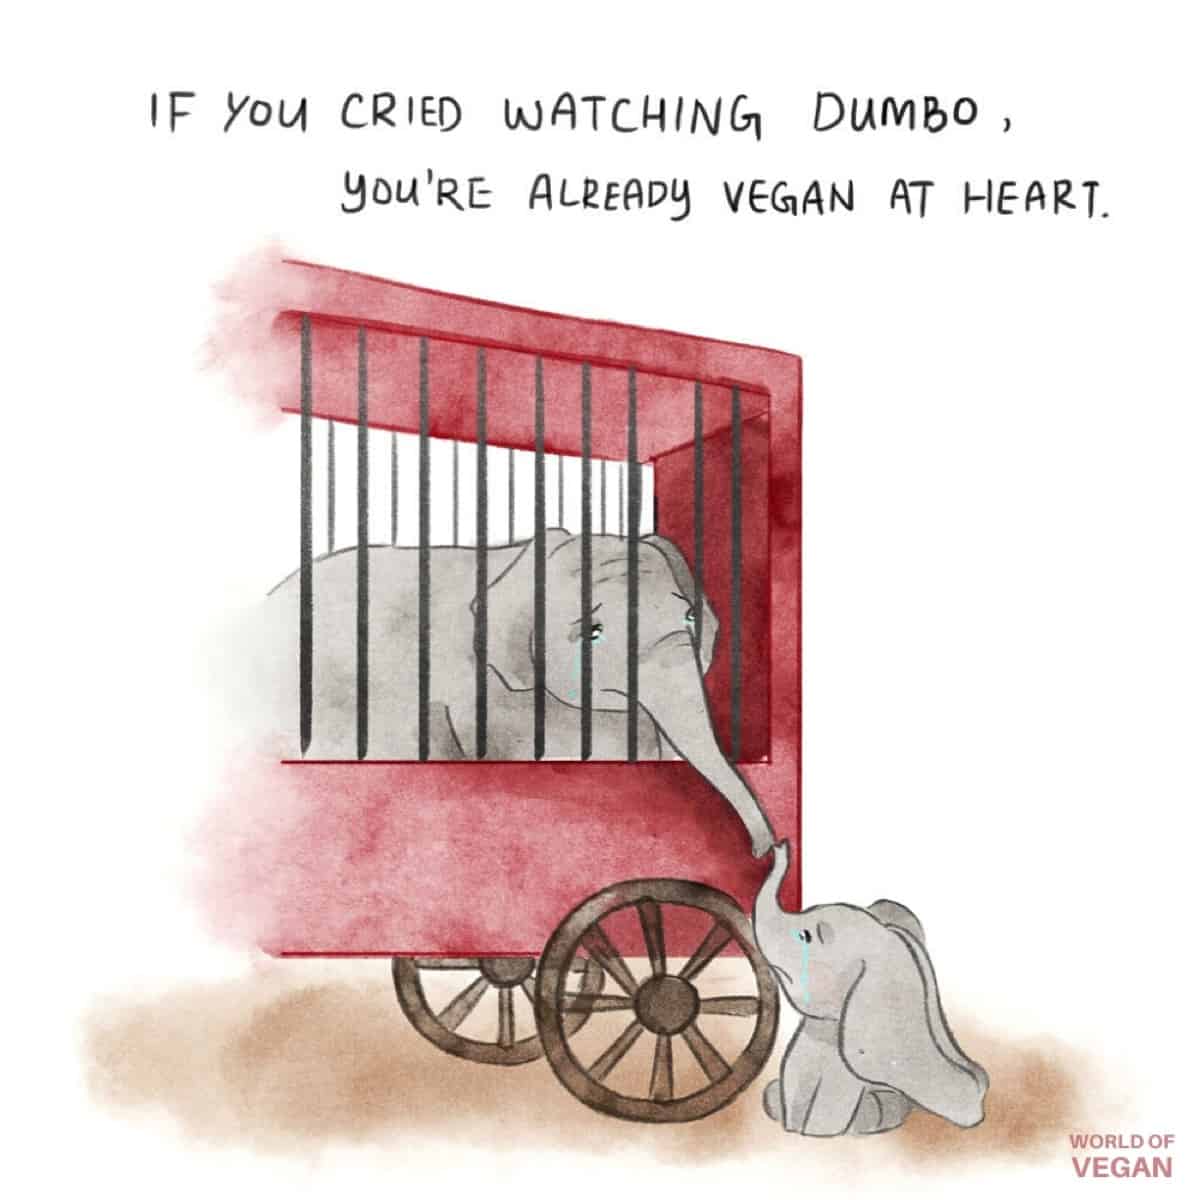 Vegan comic illustrating Dumbo the elephant from a kids movie that says "if you cried watching Dumbo, you're already vegan."